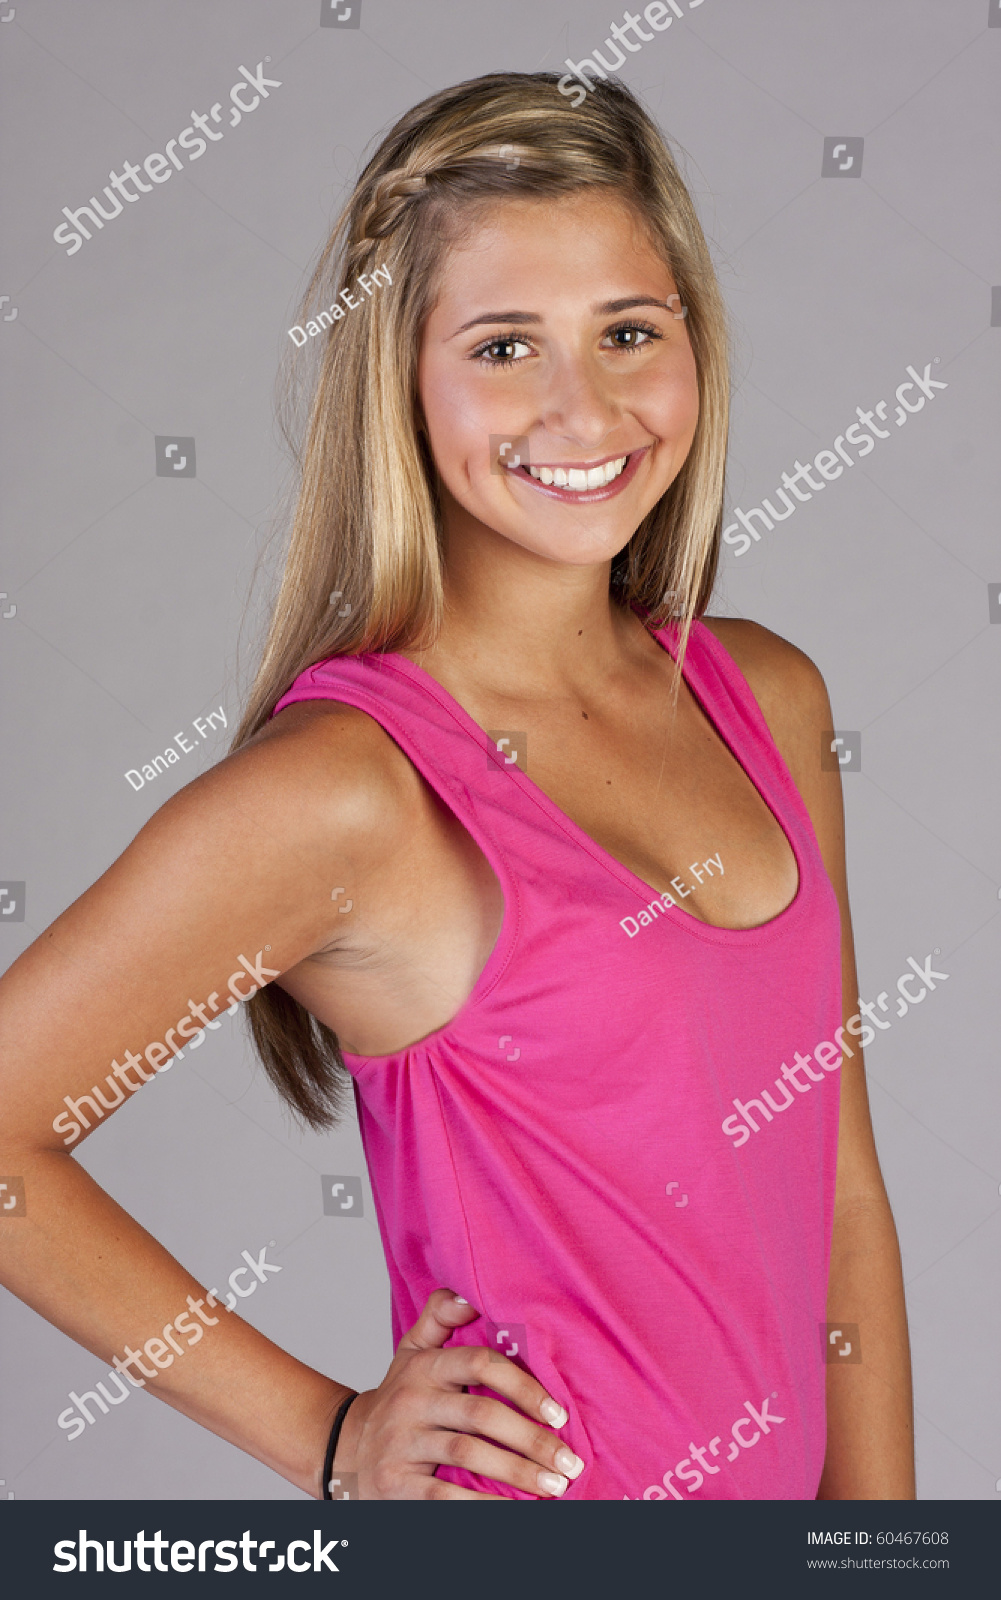 An Blond Teen Adult Pic Hq